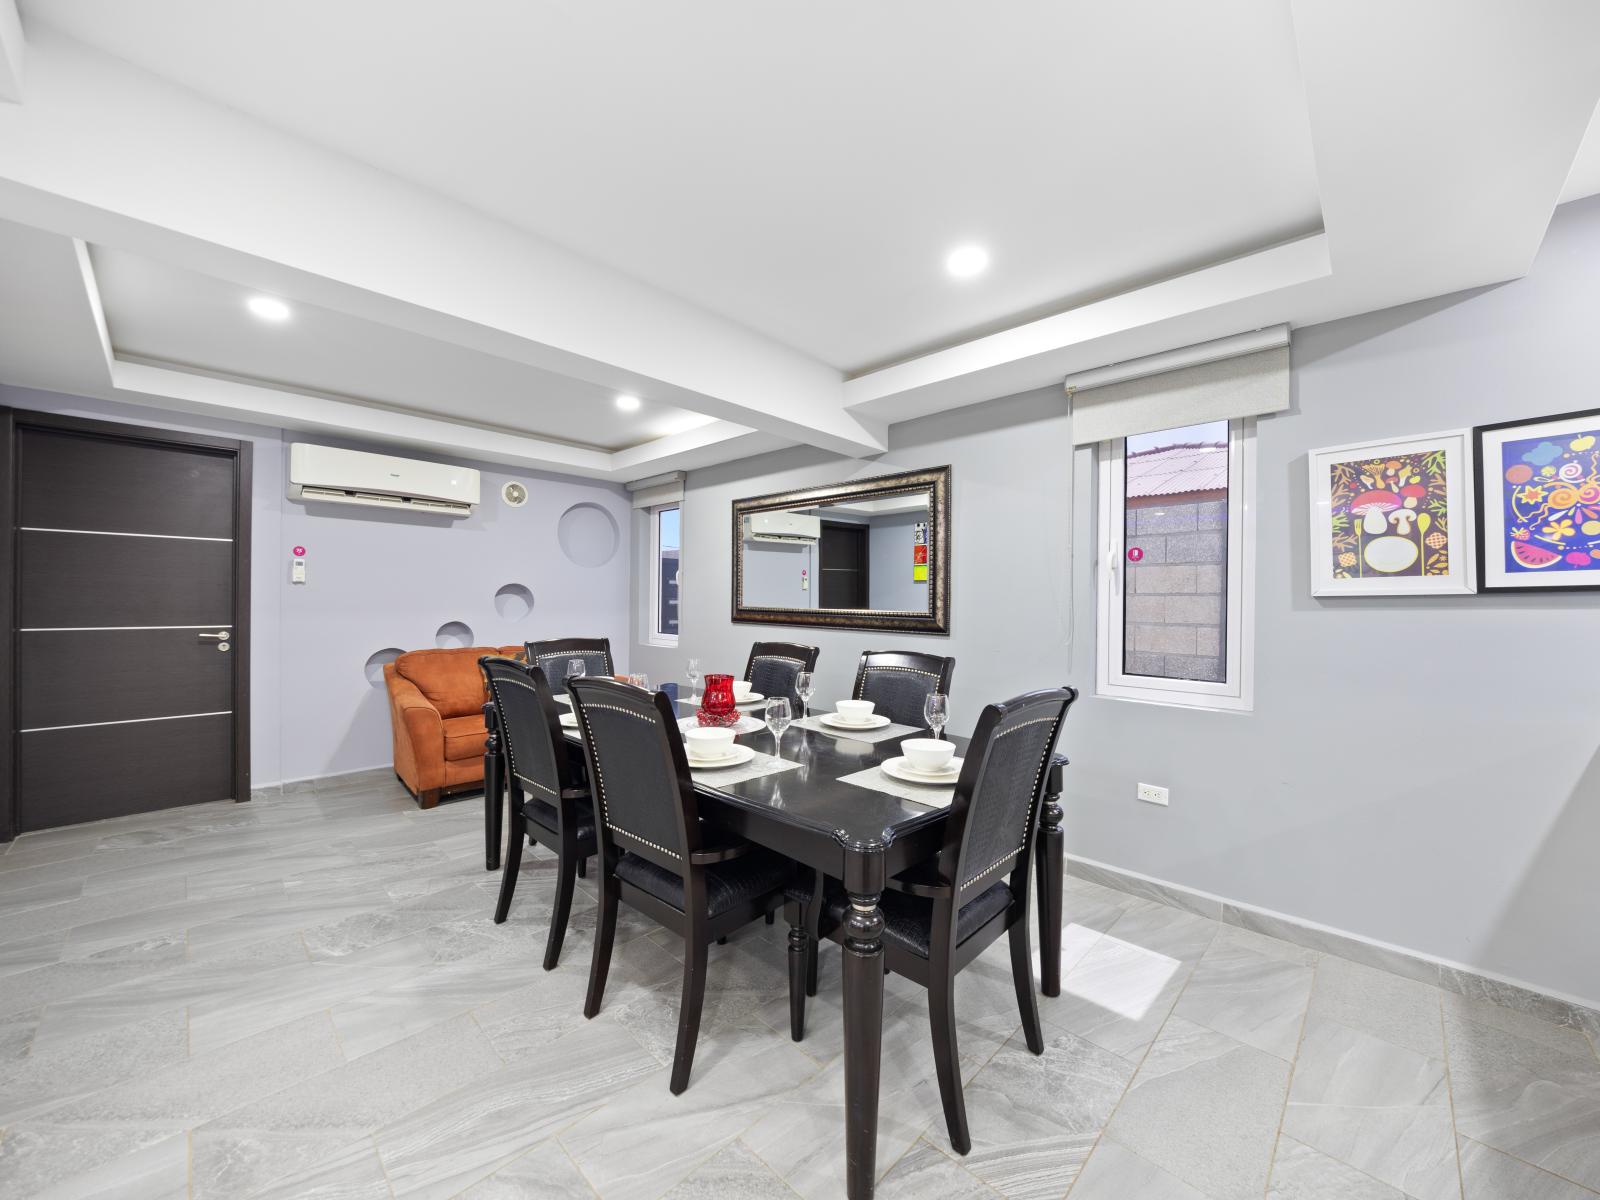 Step into elegance in this stylish dining area of the home in Aruba - Offering dining for 6 persons, where meals become memorable moments - Entertain in style in this sophisticated dining area, a setting for unforgettable dinners